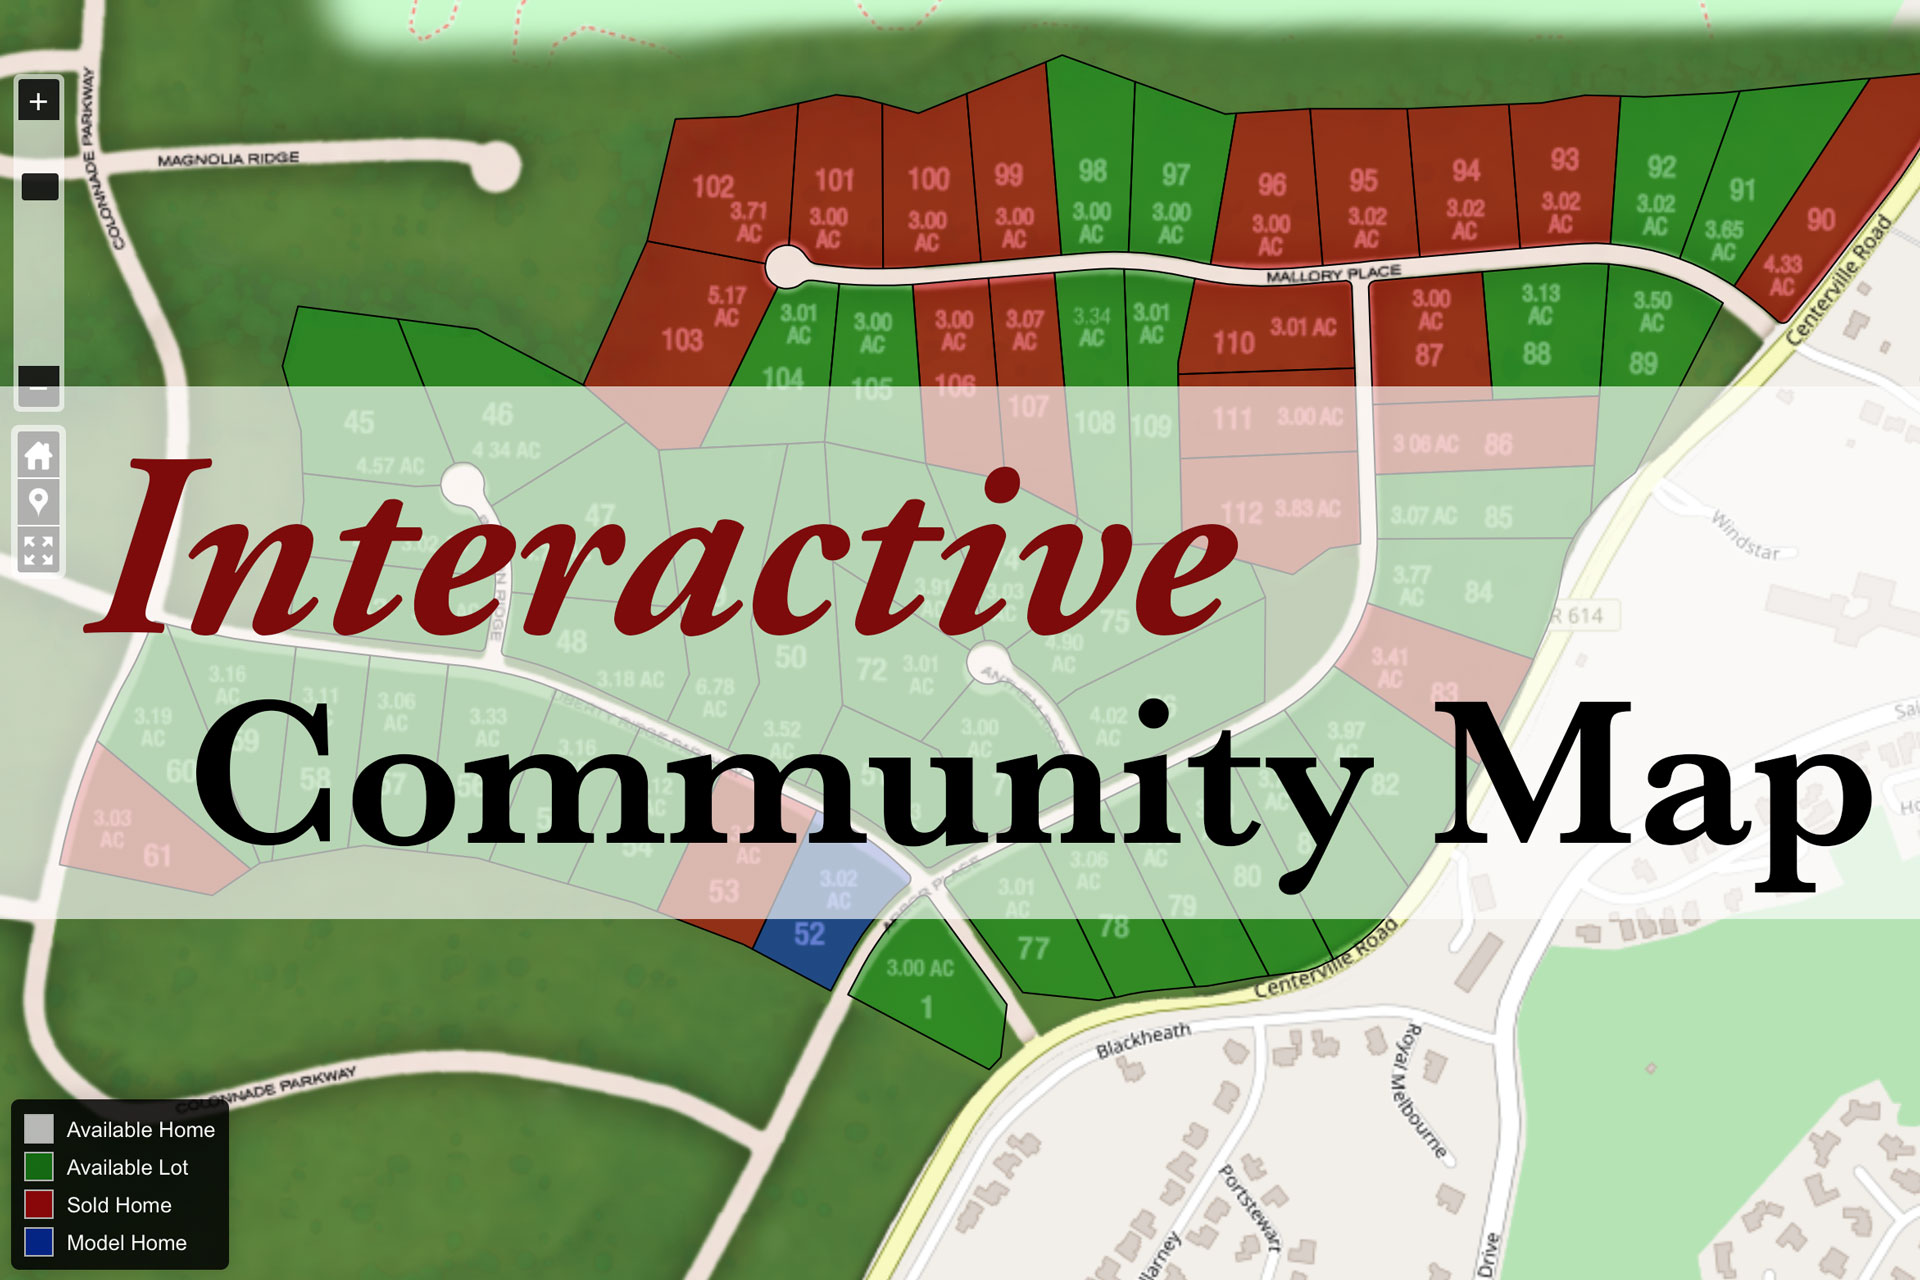 Visit Our Interactive Community Map